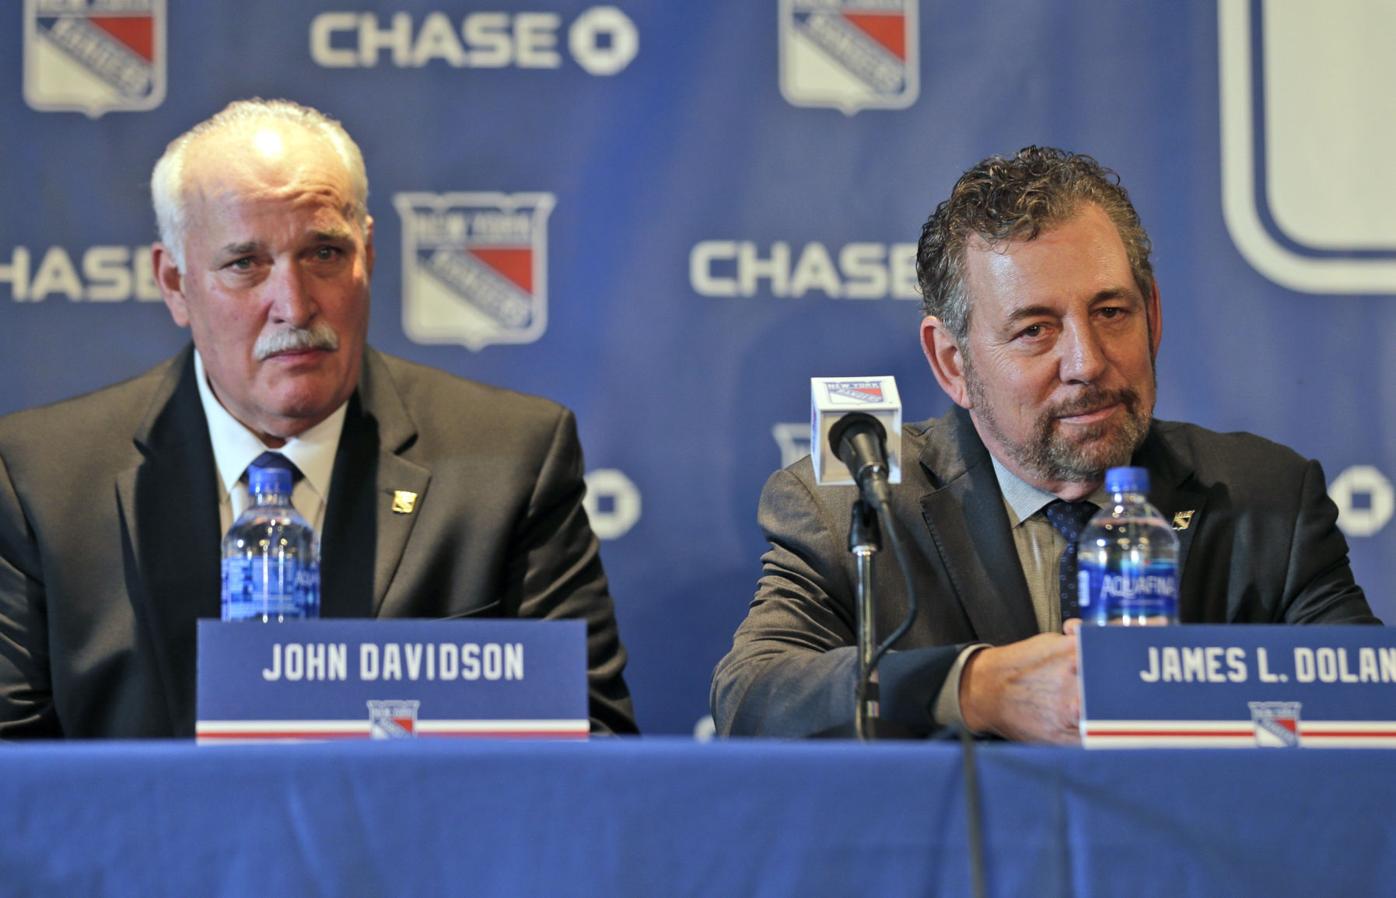 Rangers: Parros unfit to lead NHL's Department of Player Safety